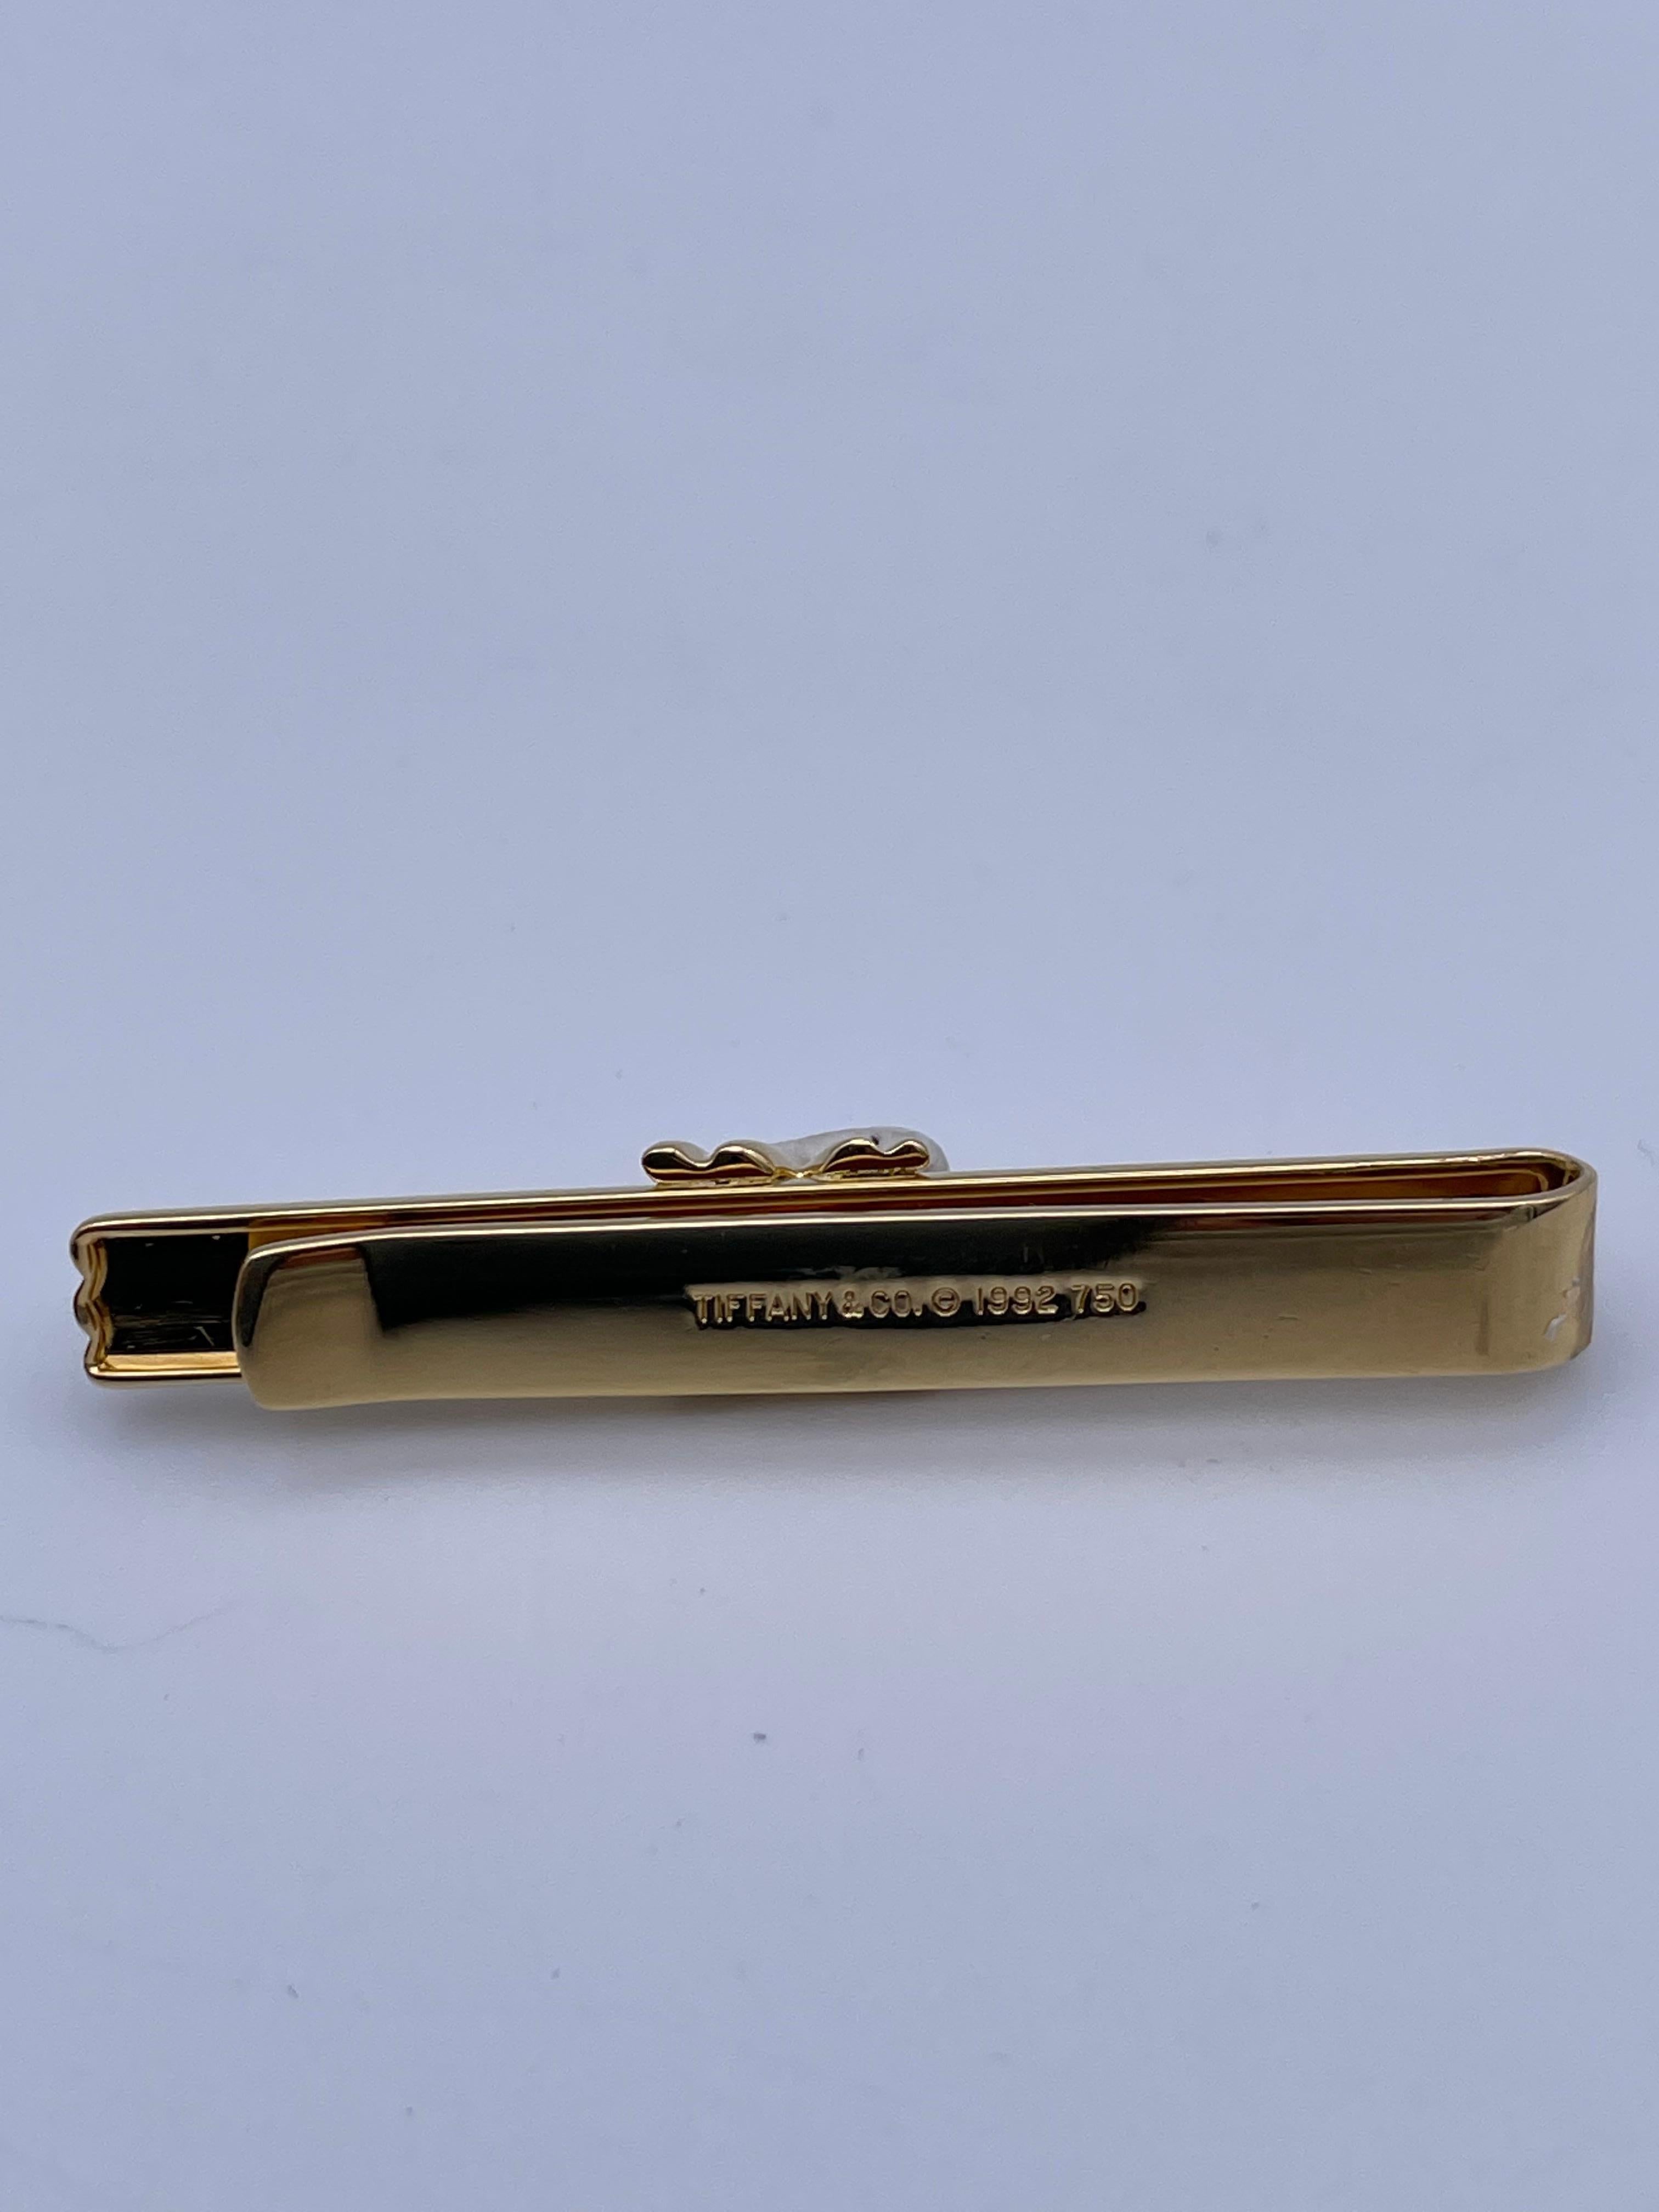 Handsome 18K yellow gold tie clip.  Made and signed by TIFFANY & CO.  Classic deep line pattern, with a raised applied 